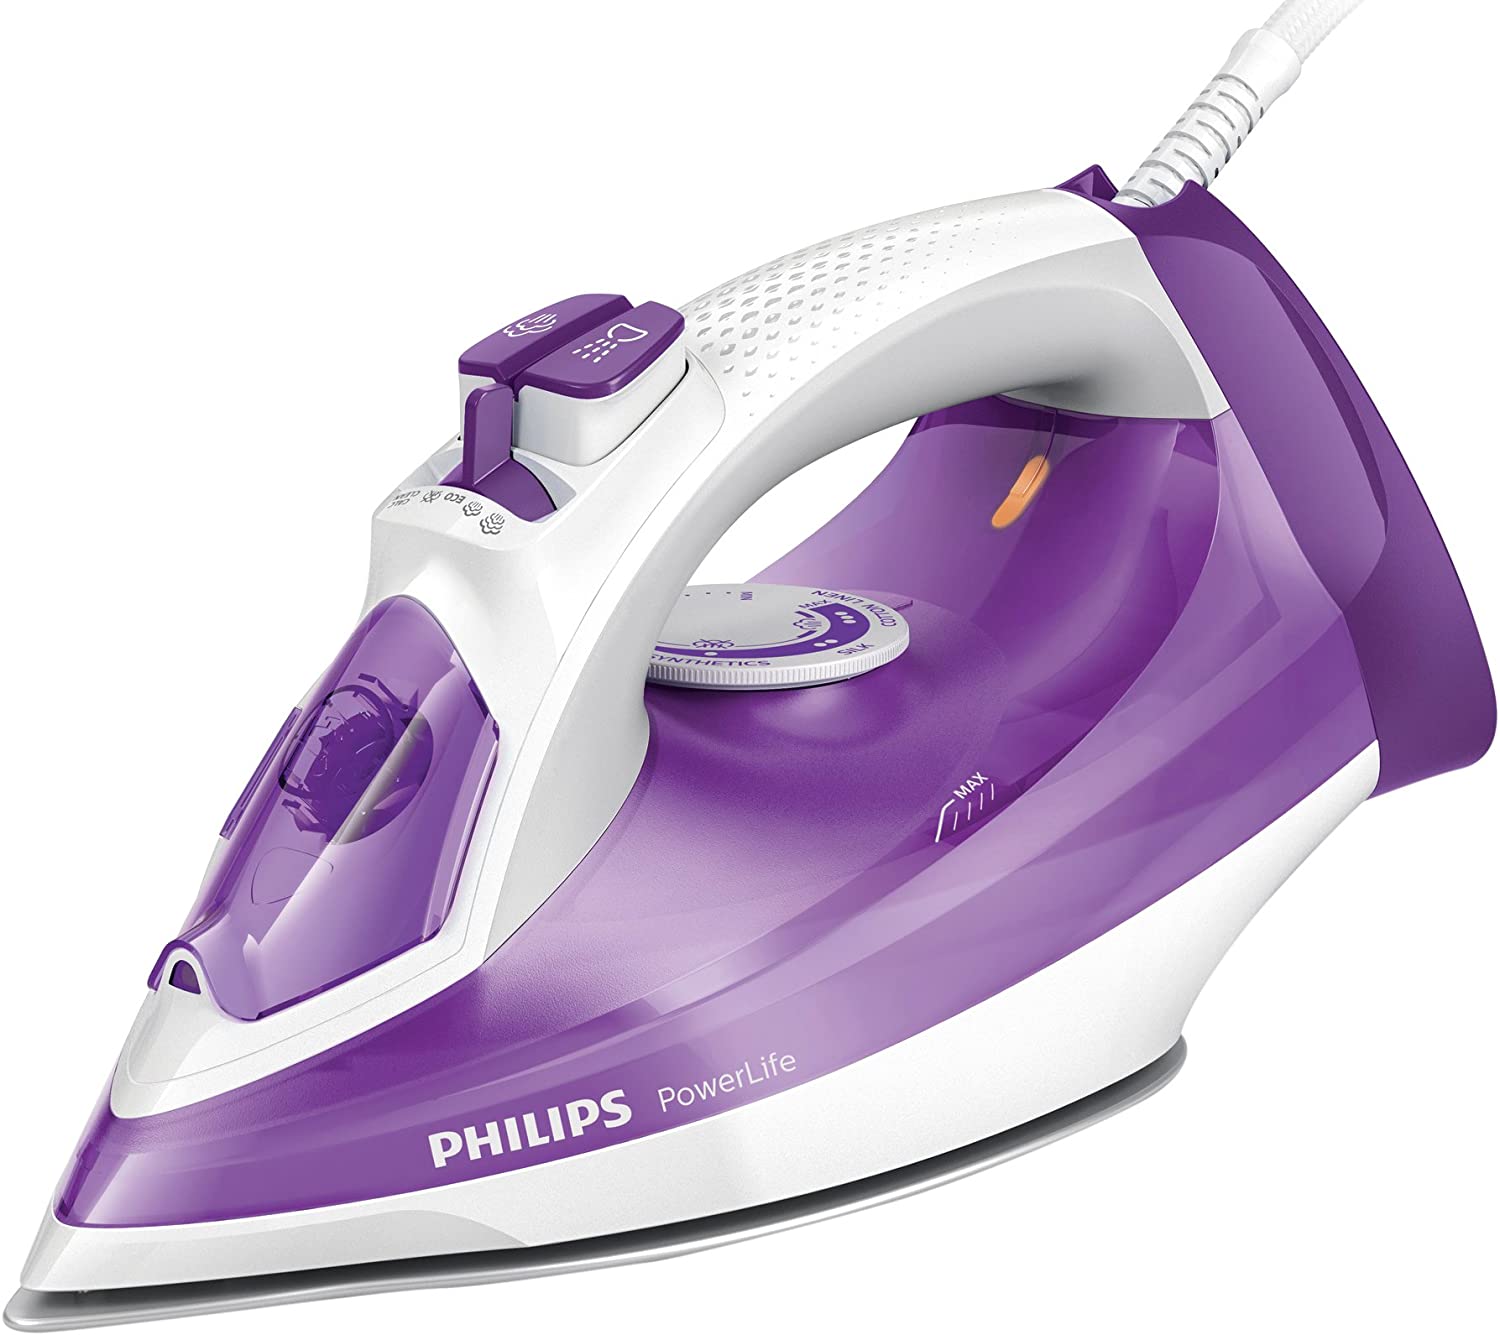 Philips Power Life Steam iron 2300 W - GC2991 | reliable performance | lightweight | variable steam settings | safety features | stylish | even heat distribution | Halabh.com